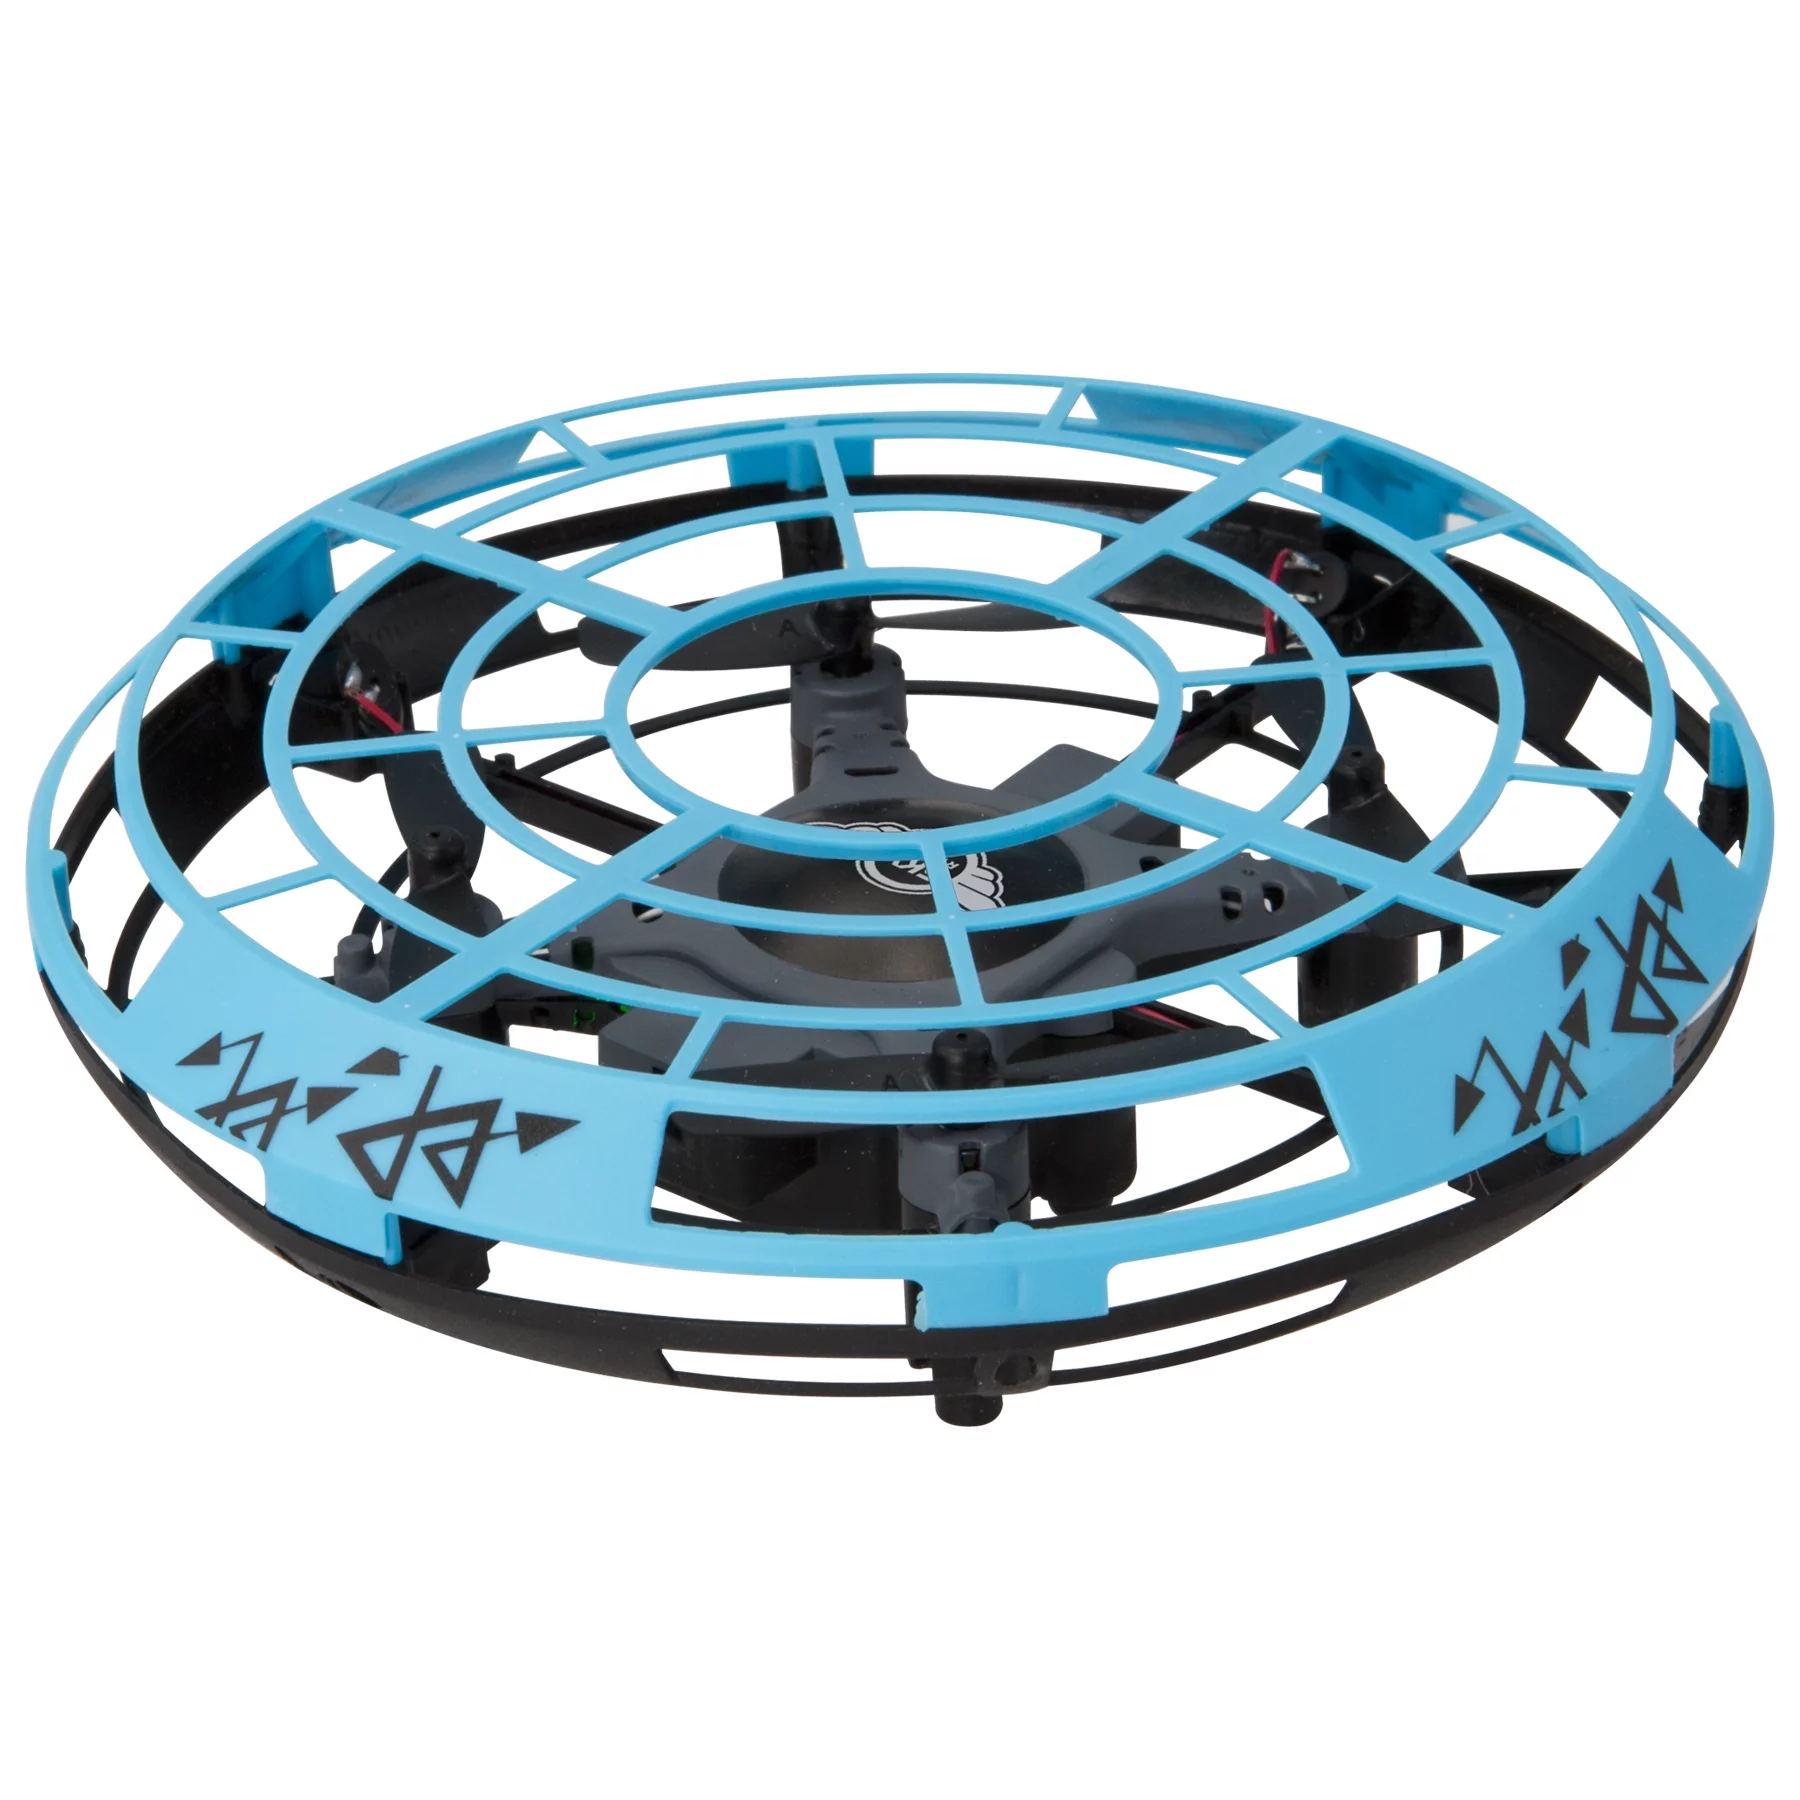 Sky Rider Satellite Obstacle Avoidance Drone, DR159, Blue